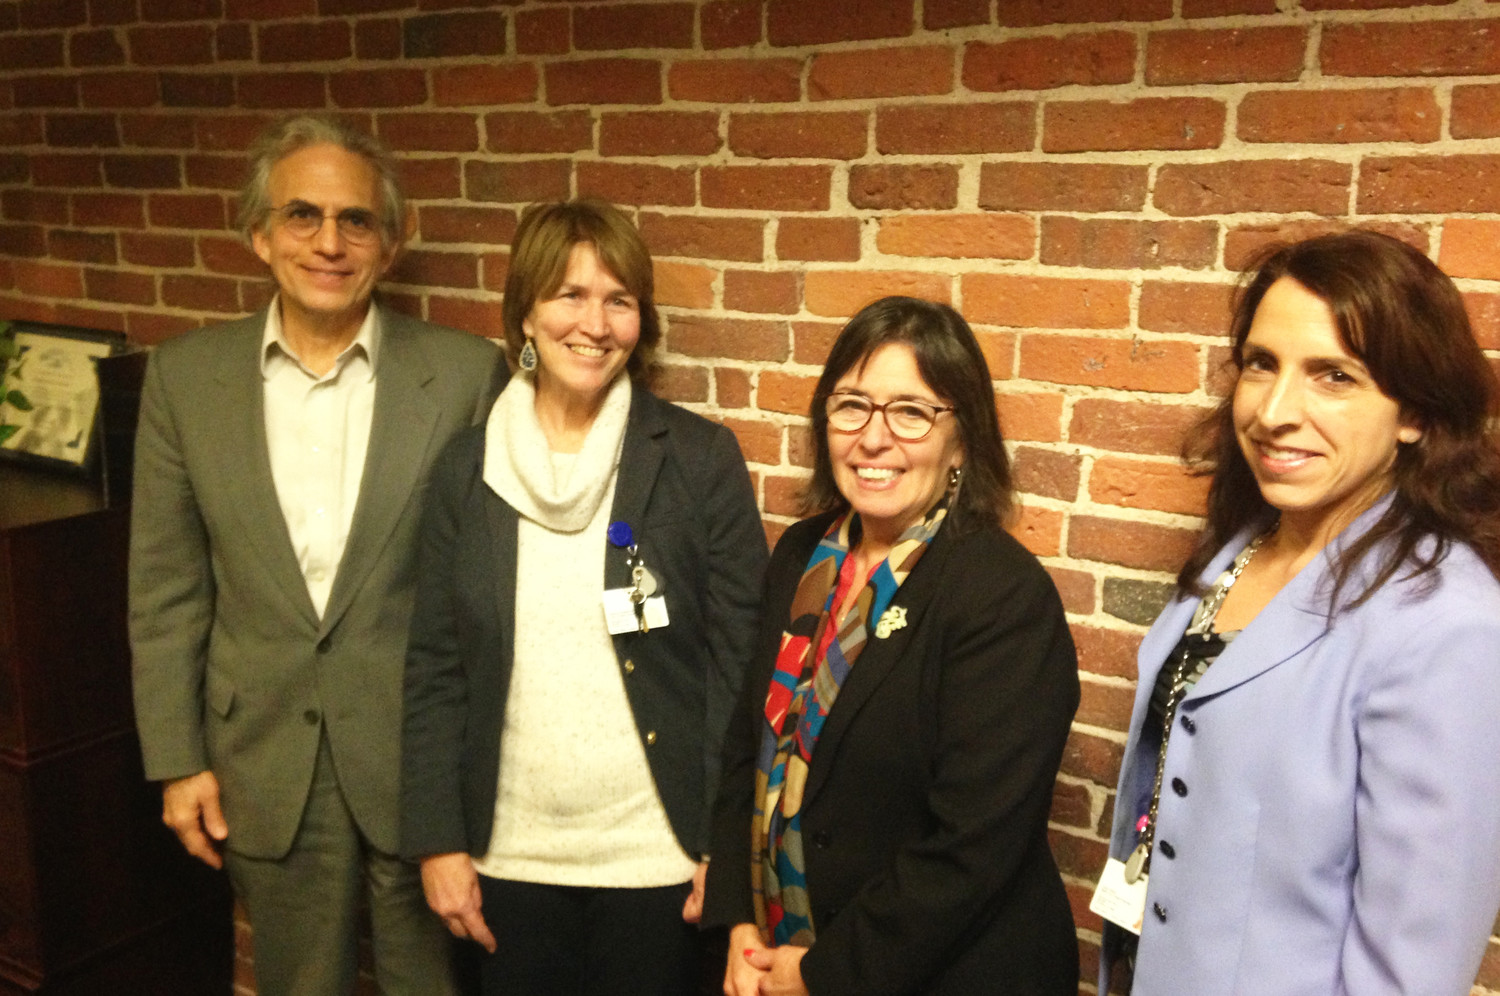 From left:Dr. Pano Yeracaris, CTC chief clinical strategist; Susanne Campbell, CTC manager of the SBIRT program; Debra Hurwitz, CTC executive director; and Linda Cabral, CTC program manager.